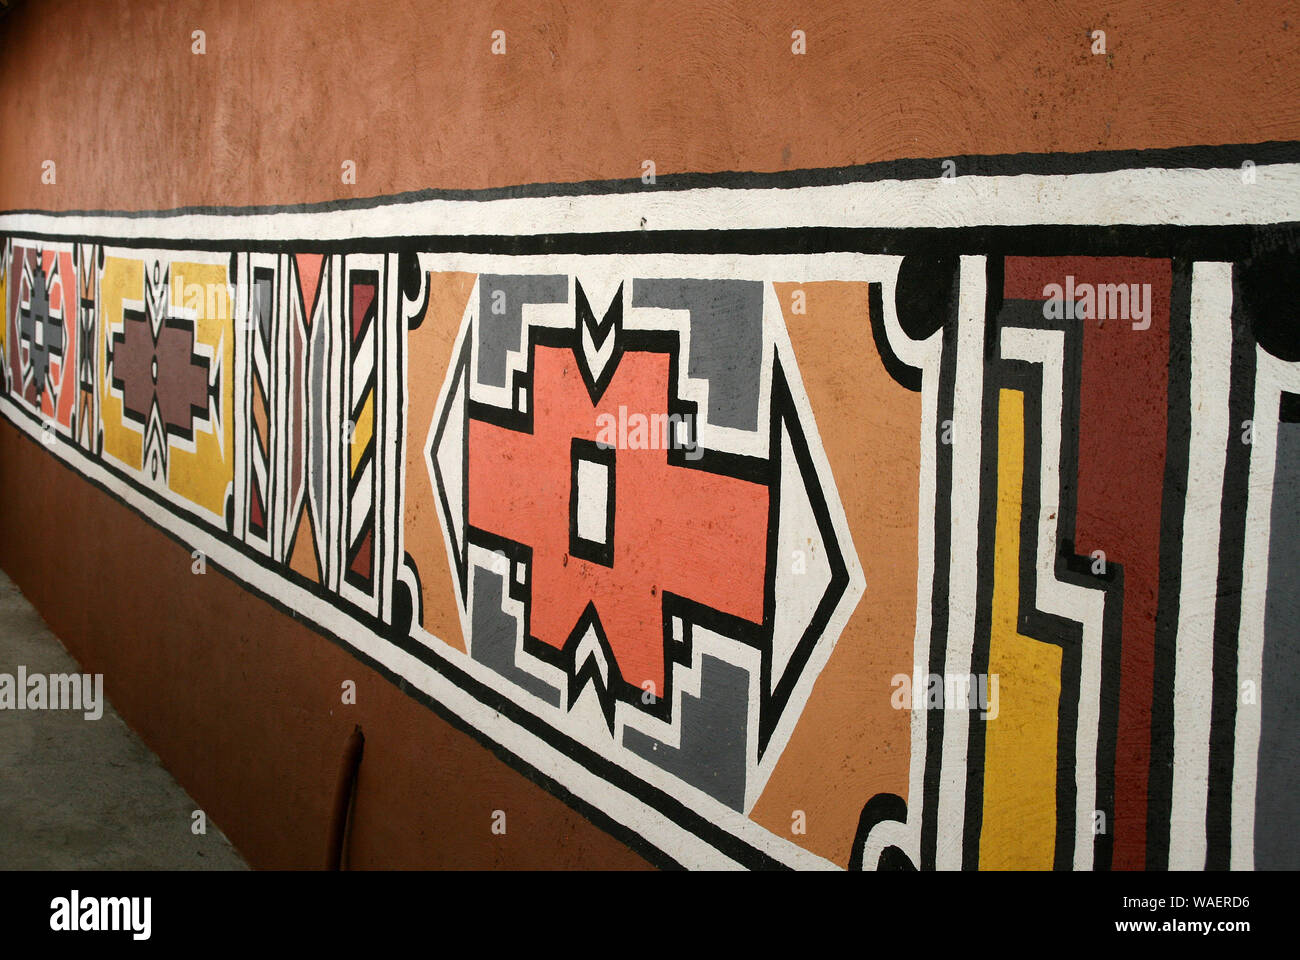 Traditional Ndebele painted walls at Lesedi Cultural Village, Cradle of Humankind, South Africa Stock Photo